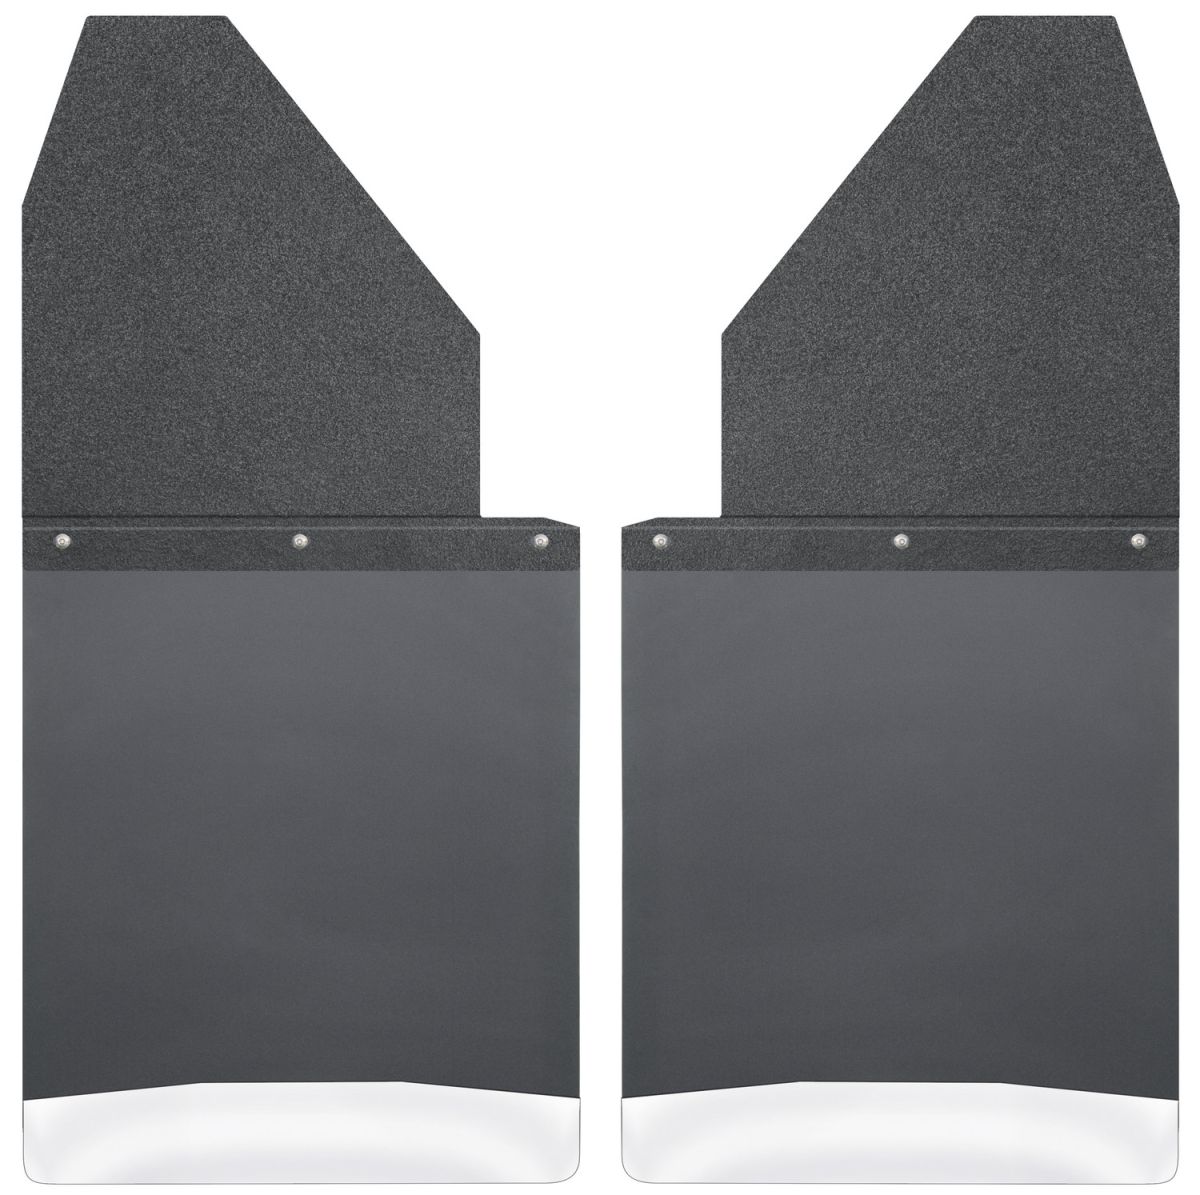 Husky Liners - Husky Liners Kick Back Mud Flaps 14" Wide Black Top and Stainless Steel Weight Universal Fit 17111